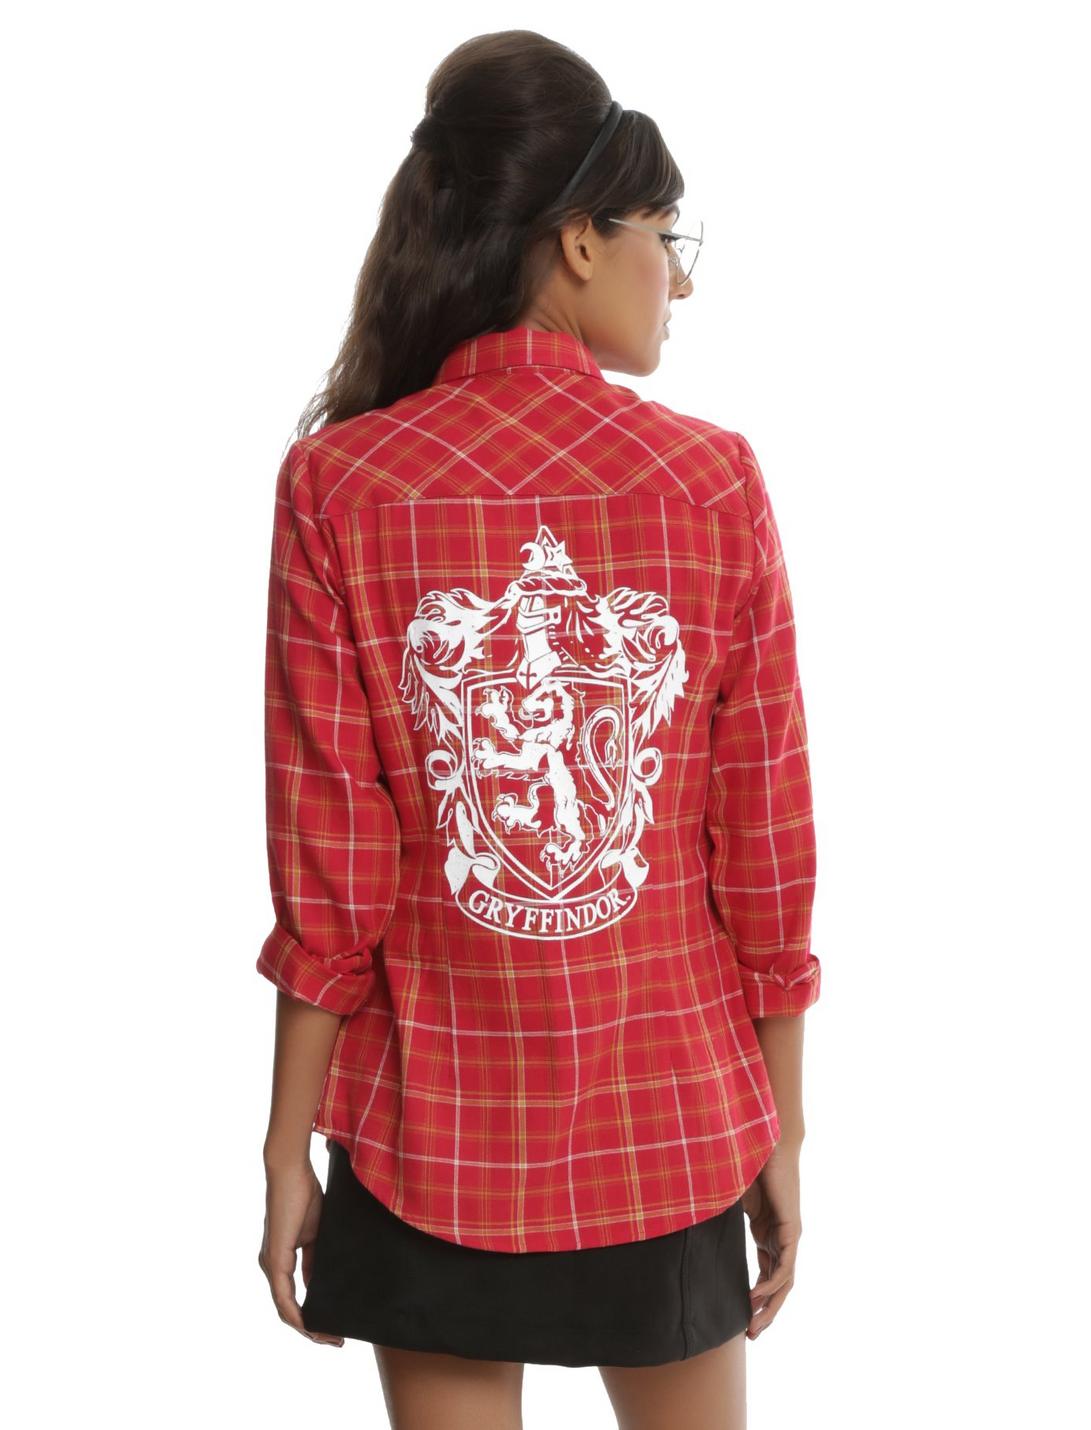 Harry Potter Gryffindor Plaid Girls Woven Button-Up, RED, hi-res